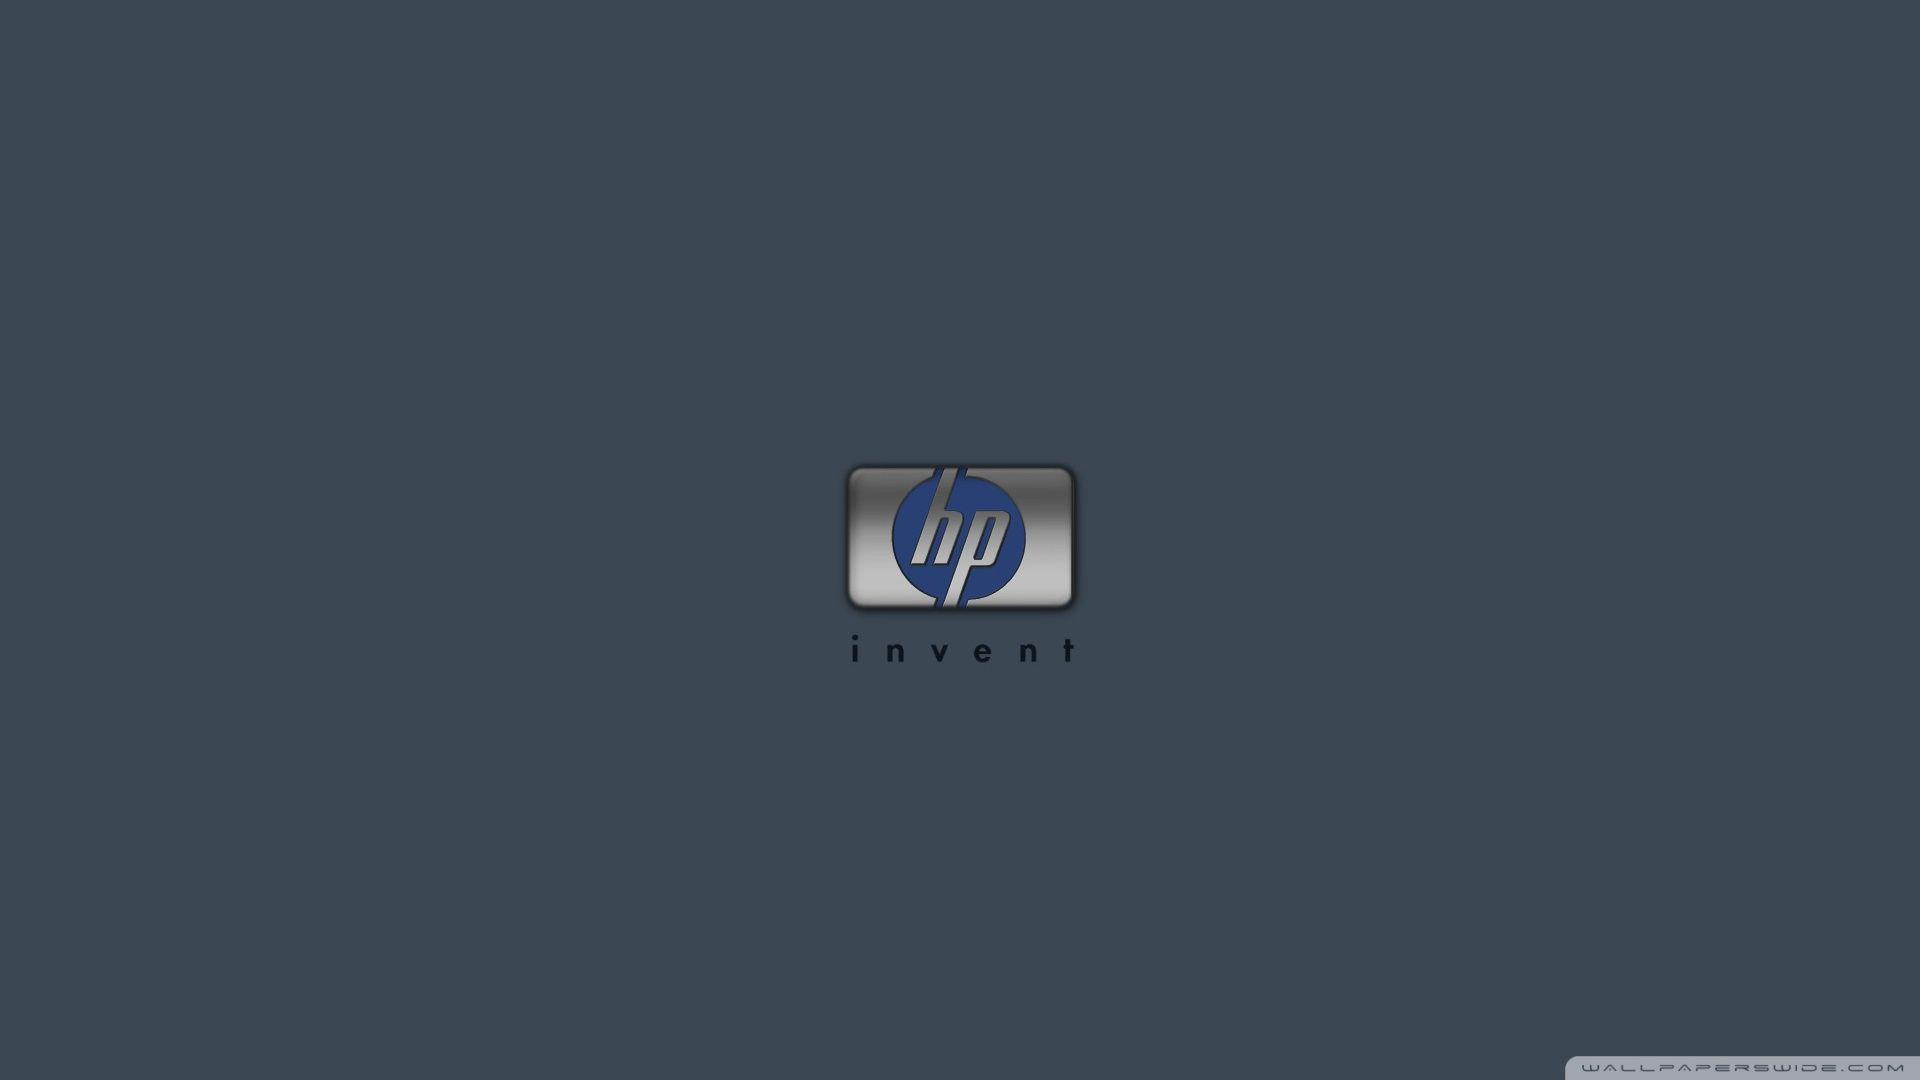 HP Laptop Wallpapers - Top Free HP Laptop Backgrounds - WallpaperAccess